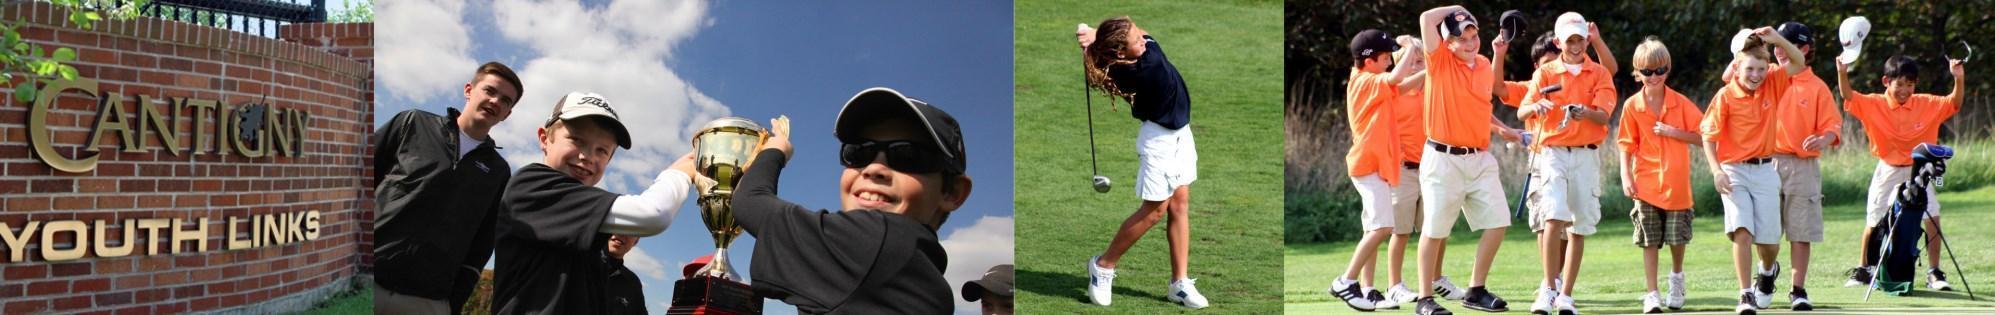 Cantigny Youth Links website header images